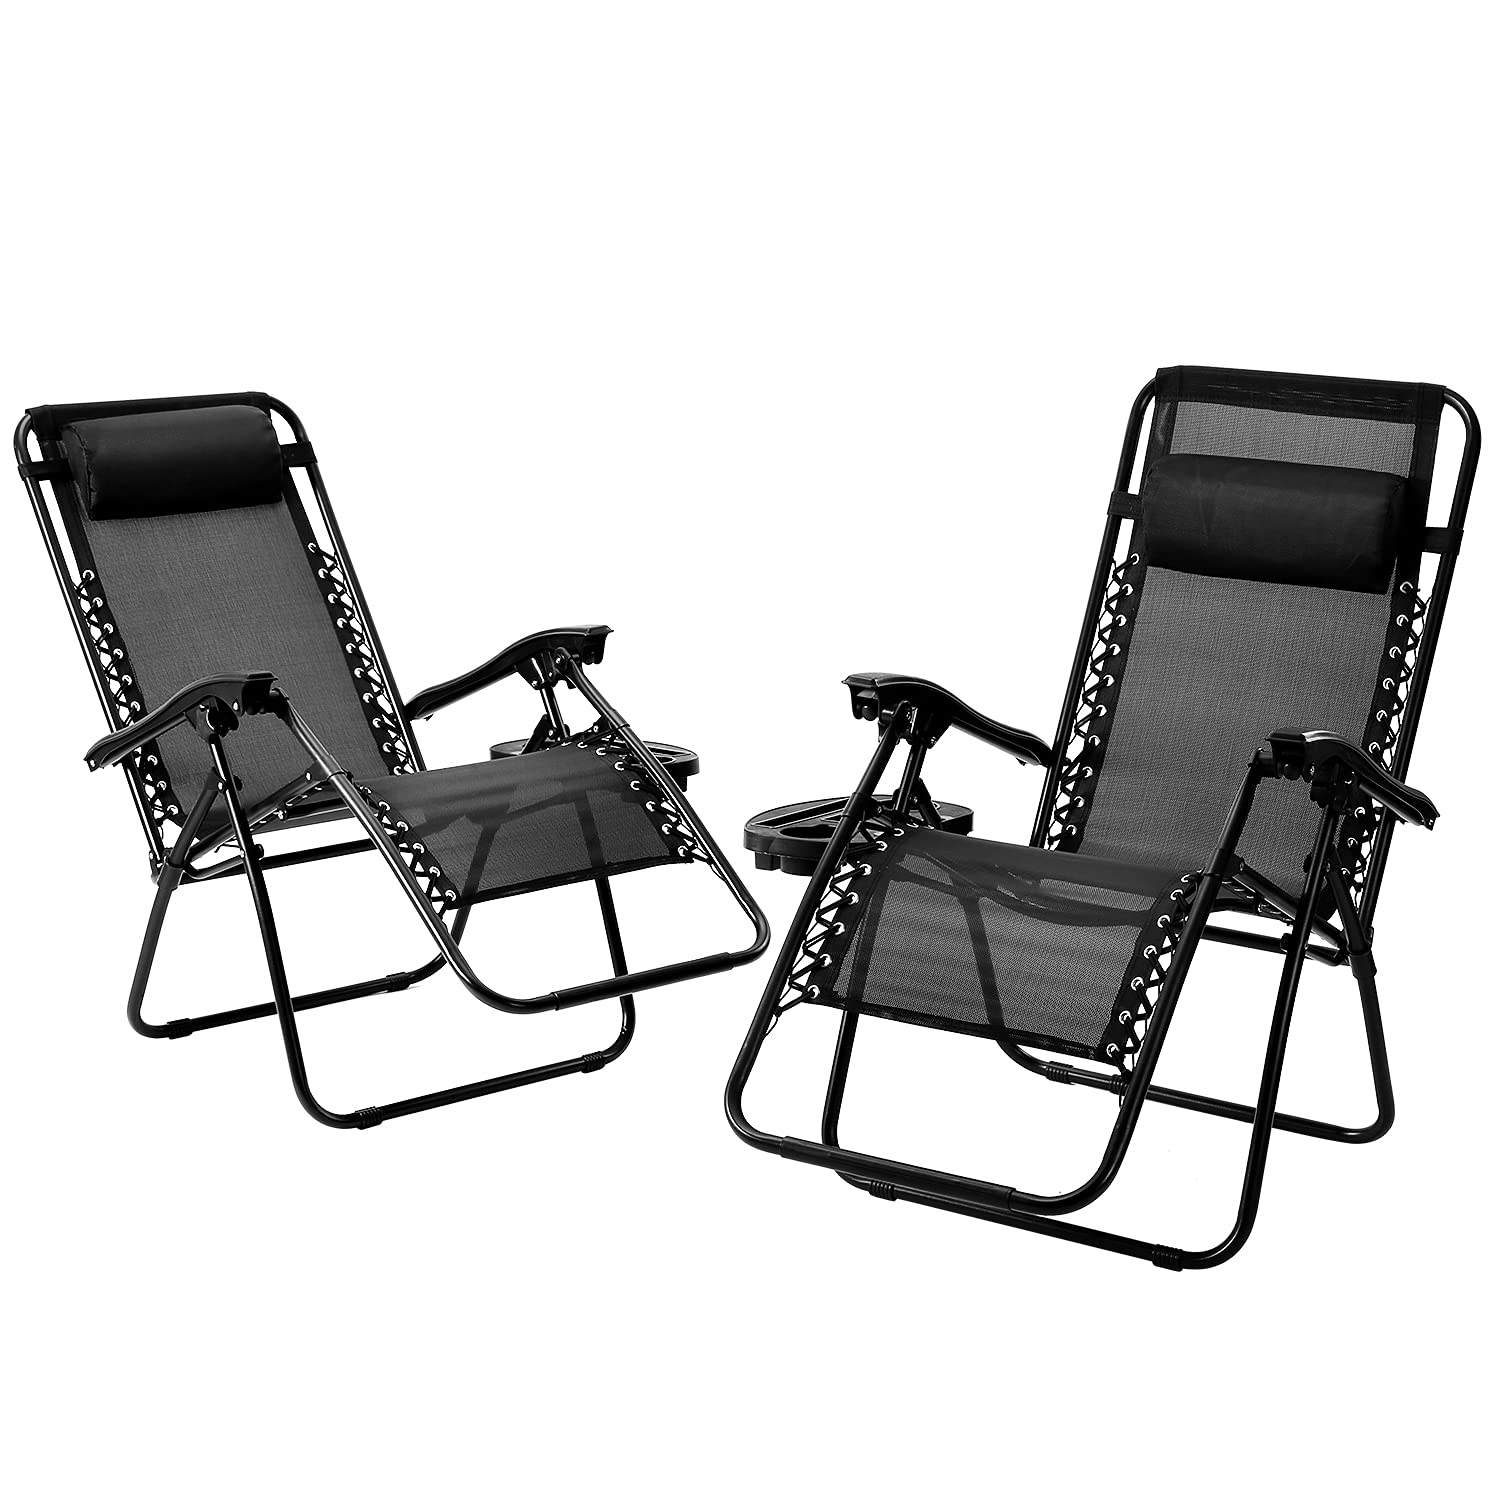 Load image into Gallery viewer, Zero Gravity Chairs Patio Chairs Set of 2 Reclining Beach Chair Adjustable Steel Mesh Zero Gravity Lounge Chair Recliners w/Pillows and Cup Holder Trays for Poolside, Backyard, Beach and Camping
